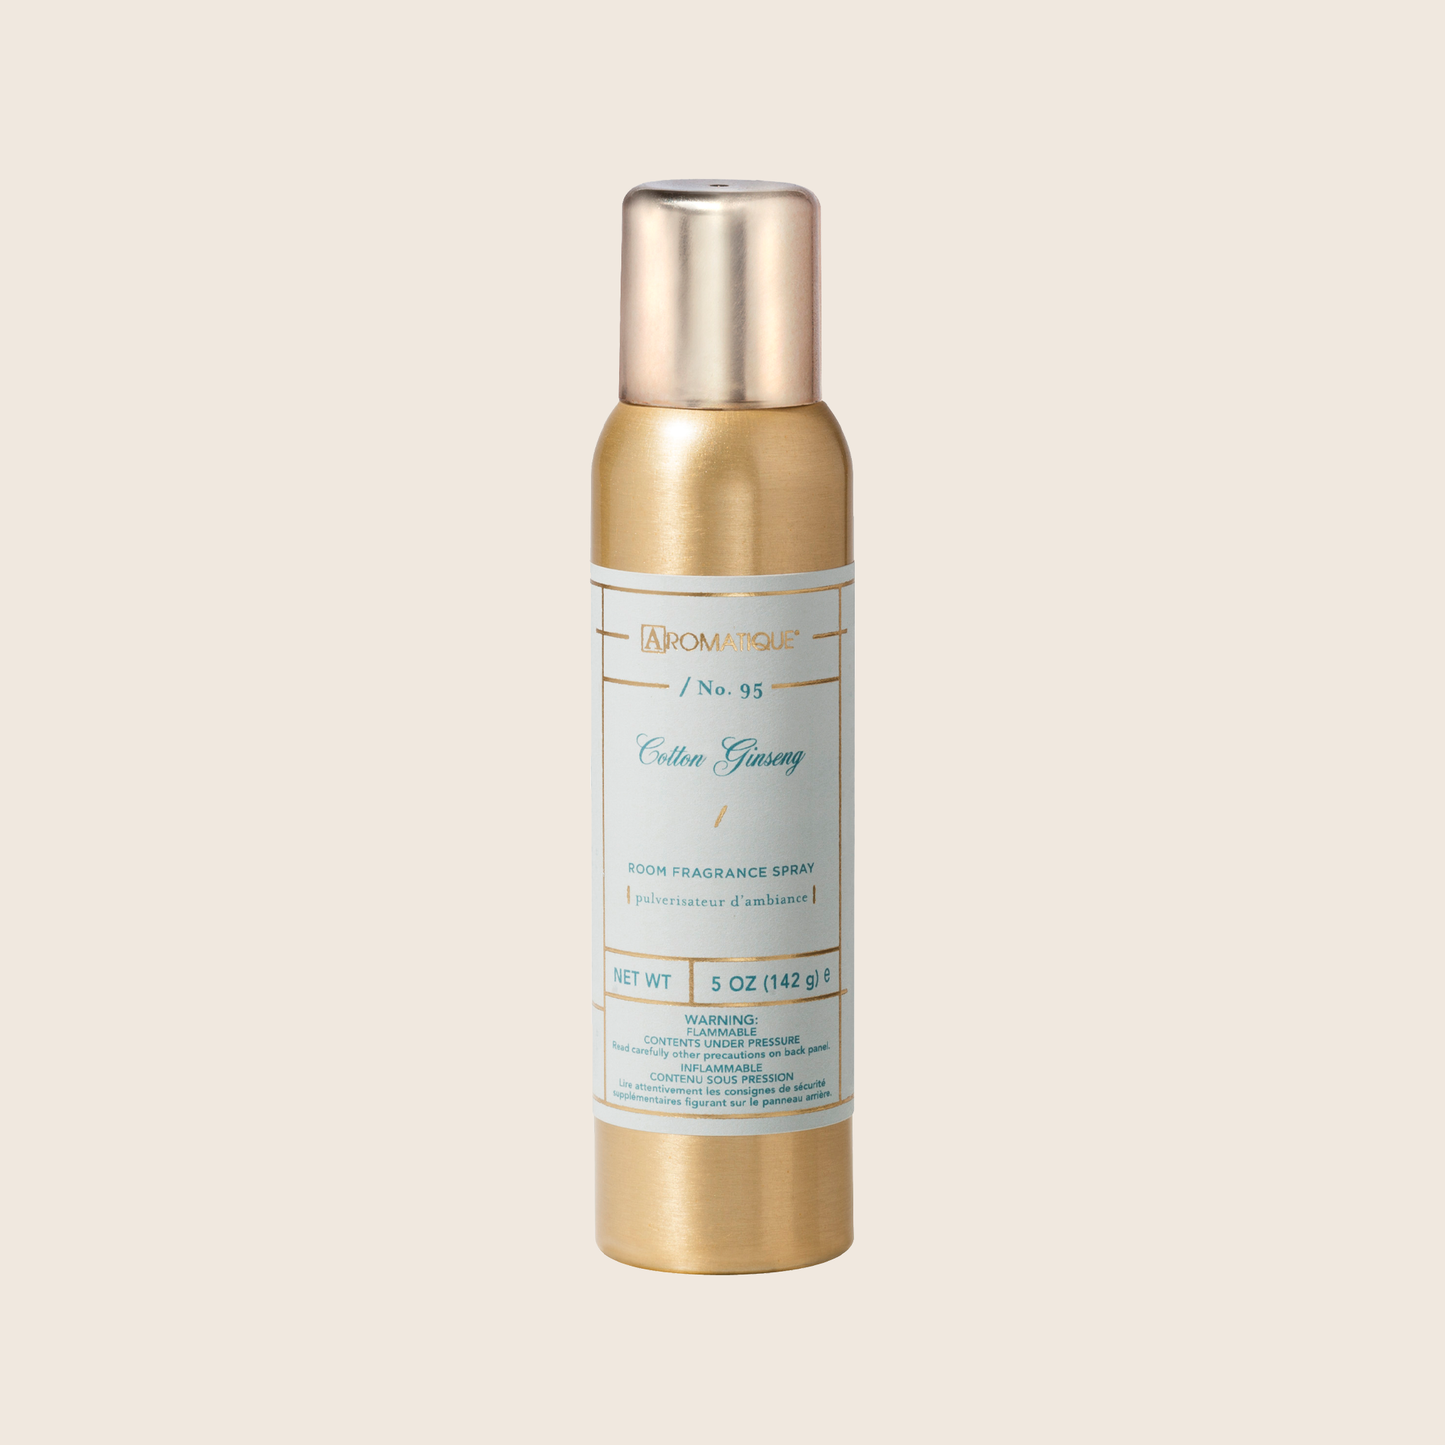 Refresh your space with the Cotton Ginseng Aerosol Room Spray. A light spray of this fine mist will fill your room with the relaxing fragrance of freshly picked cotton blended with jasmine, eucalyptus, and lavender florals.